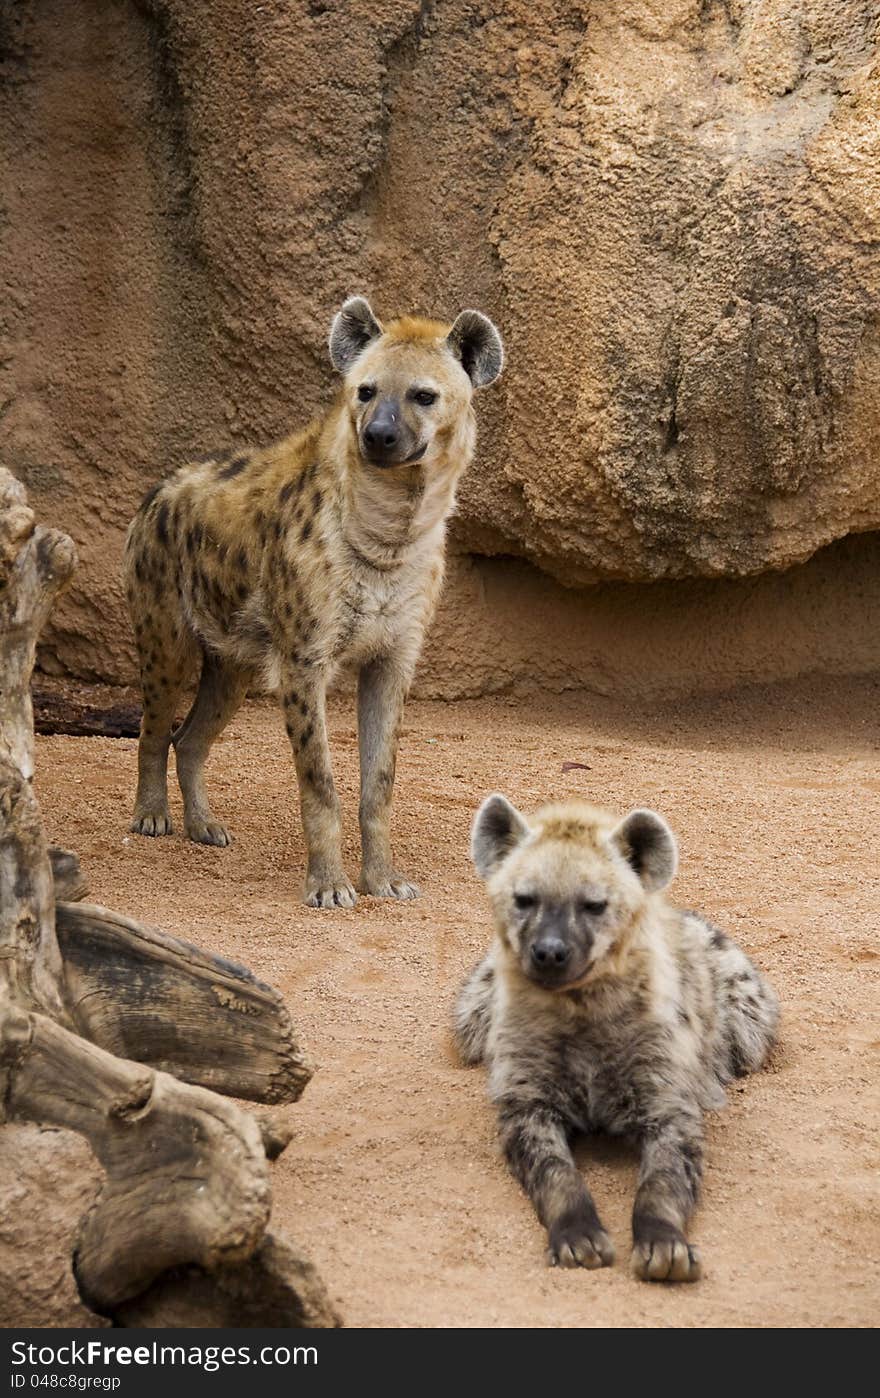 Hyena mother and cub in the valencia zoo - biopark